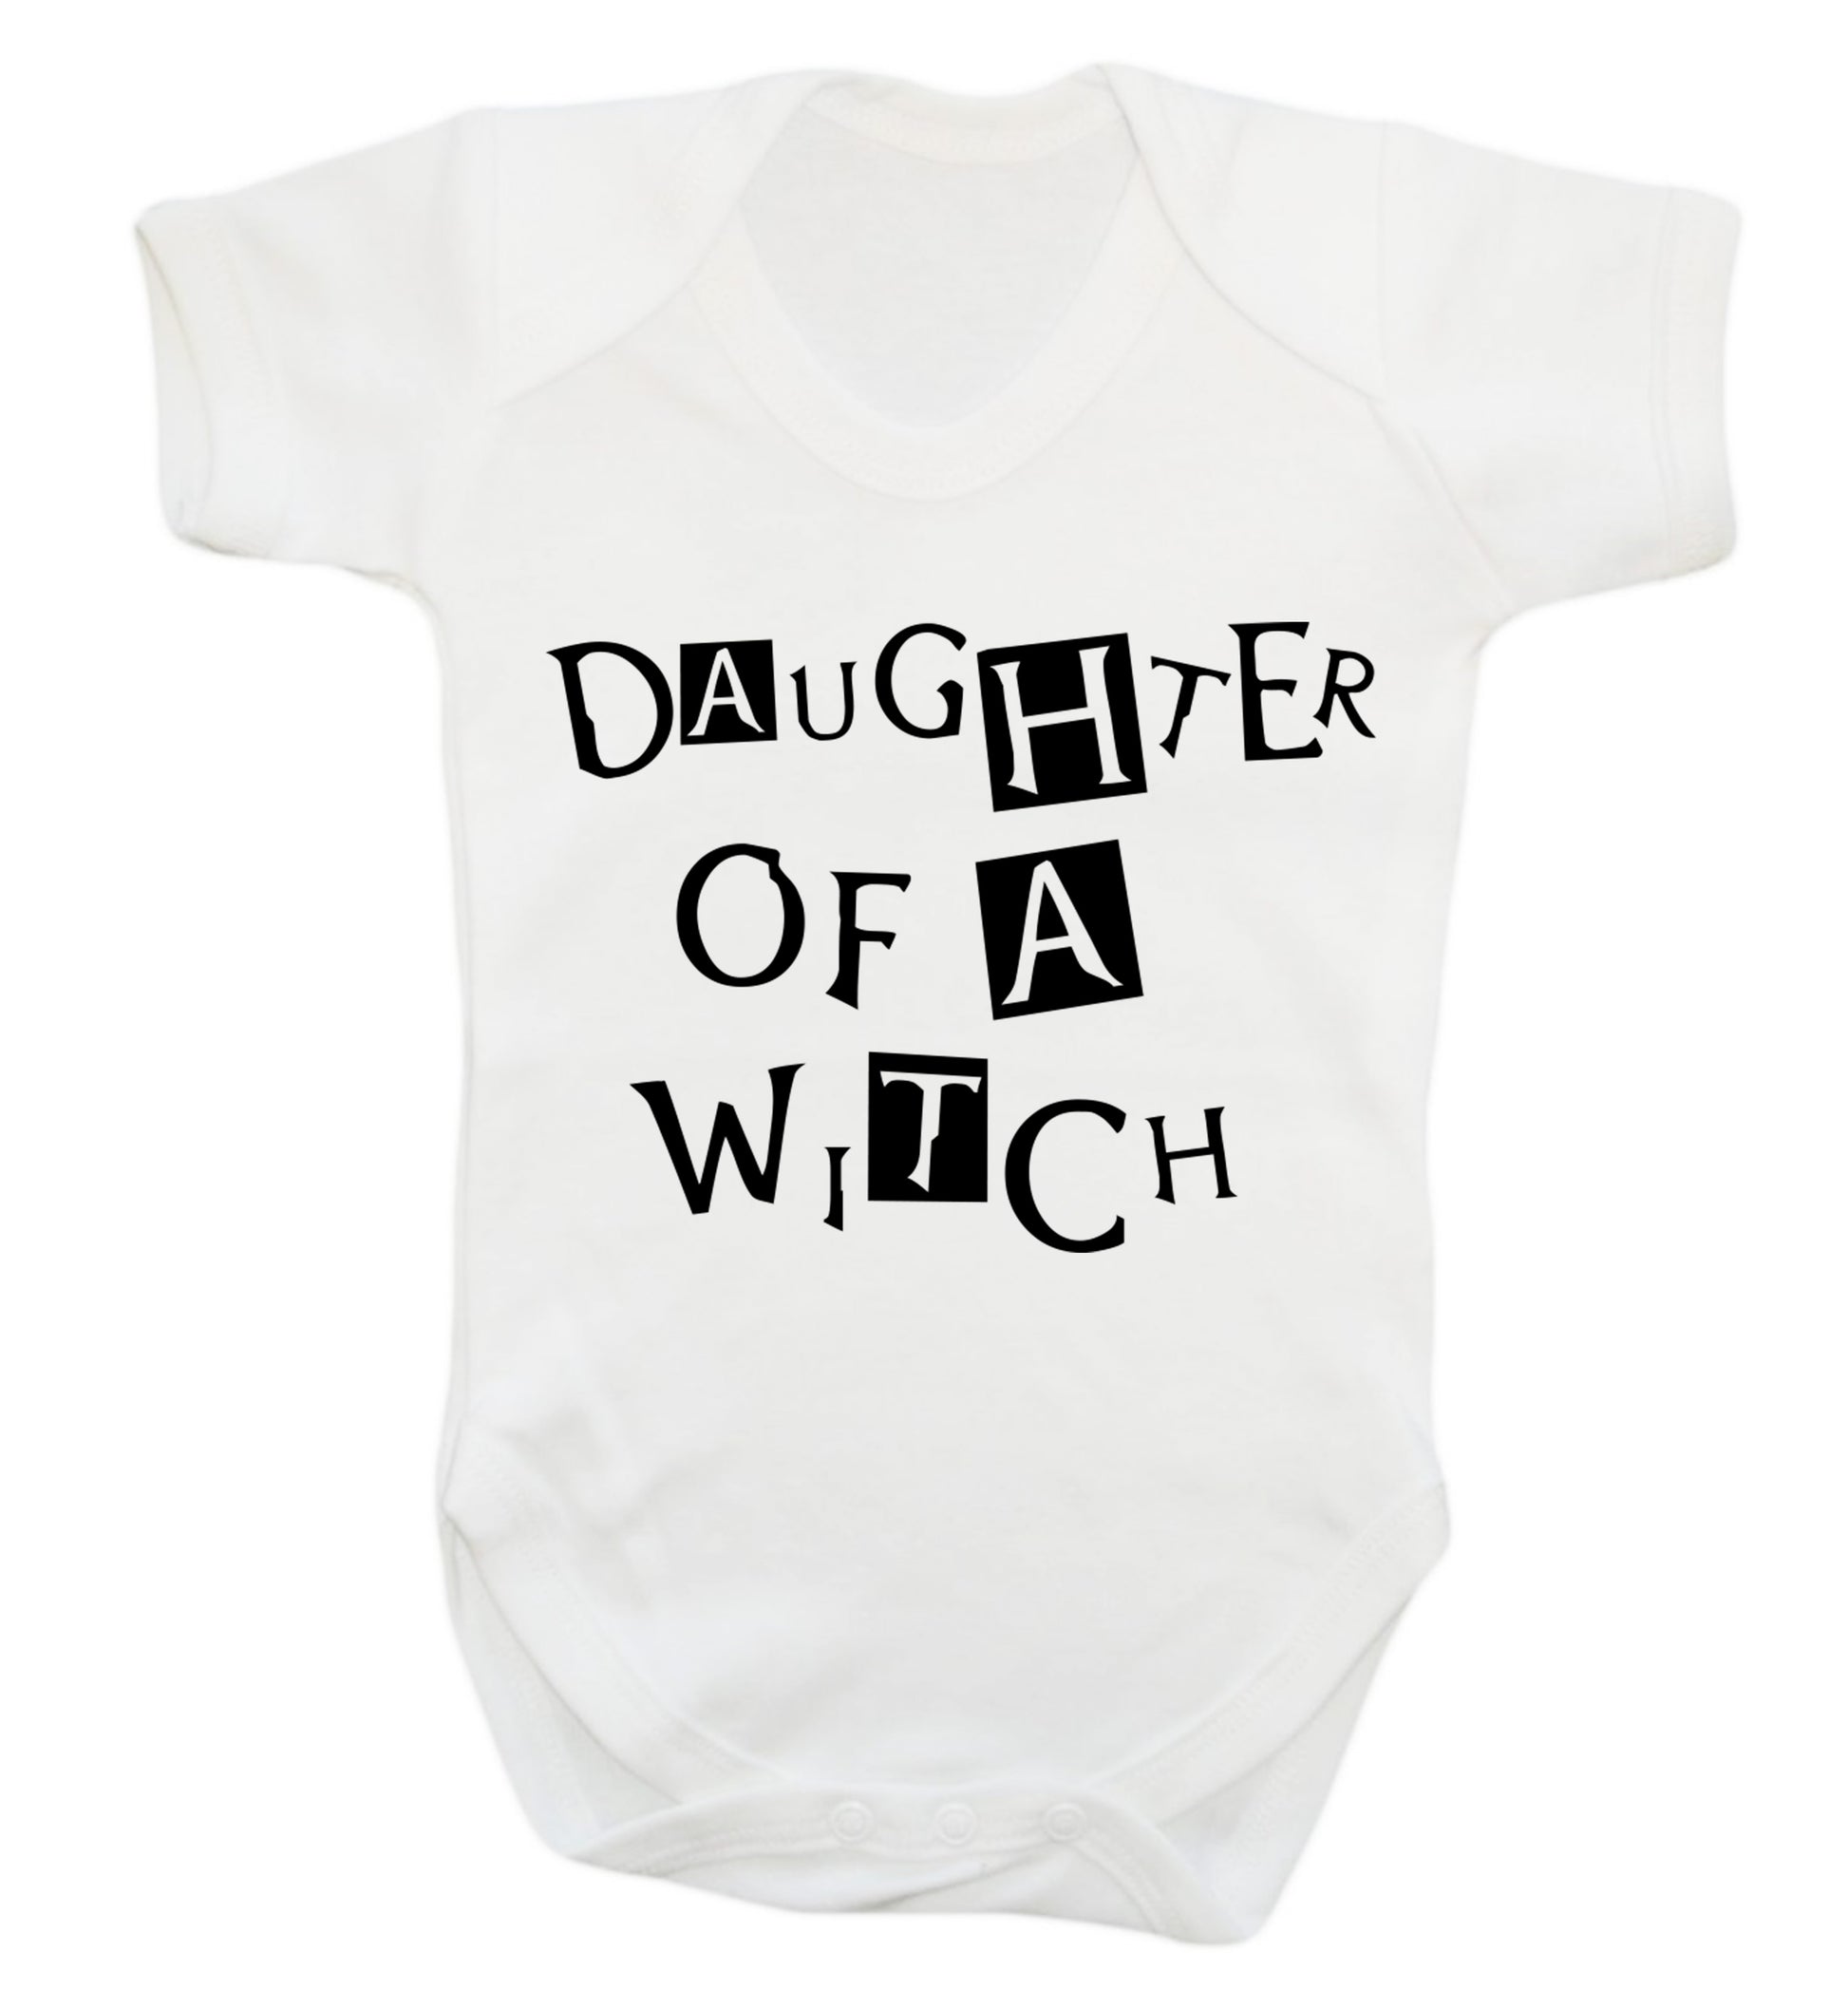 Daughter of a witch Baby Vest white 18-24 months